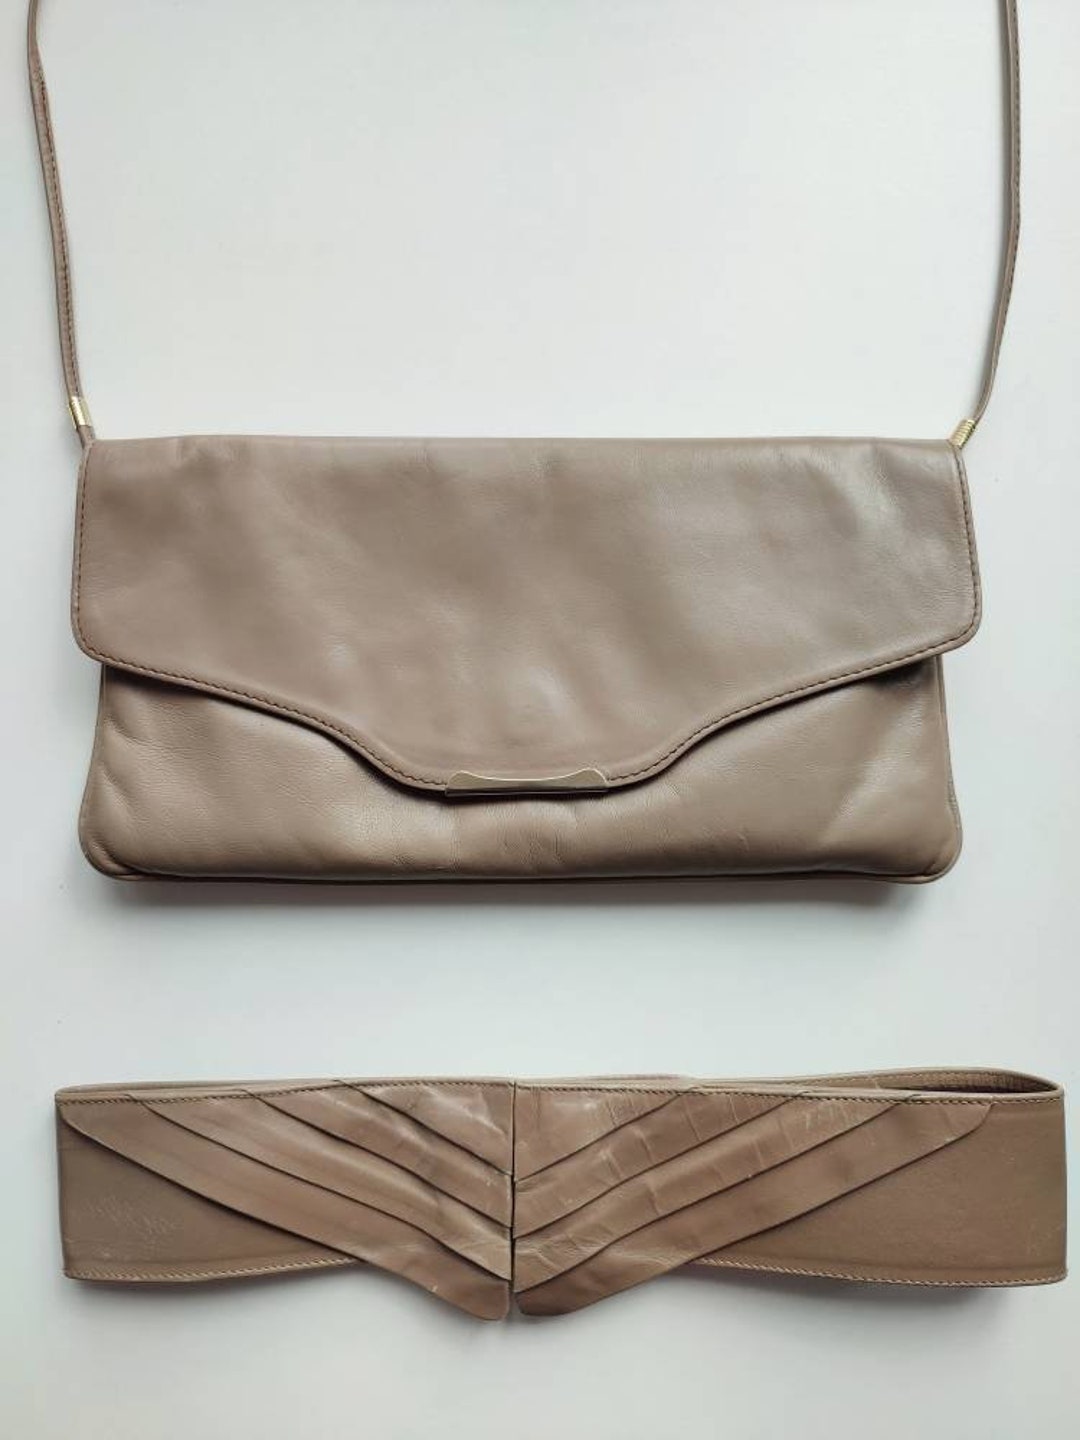 7 Inch Leather Crossbody Bag in VINTAGE TAUPE